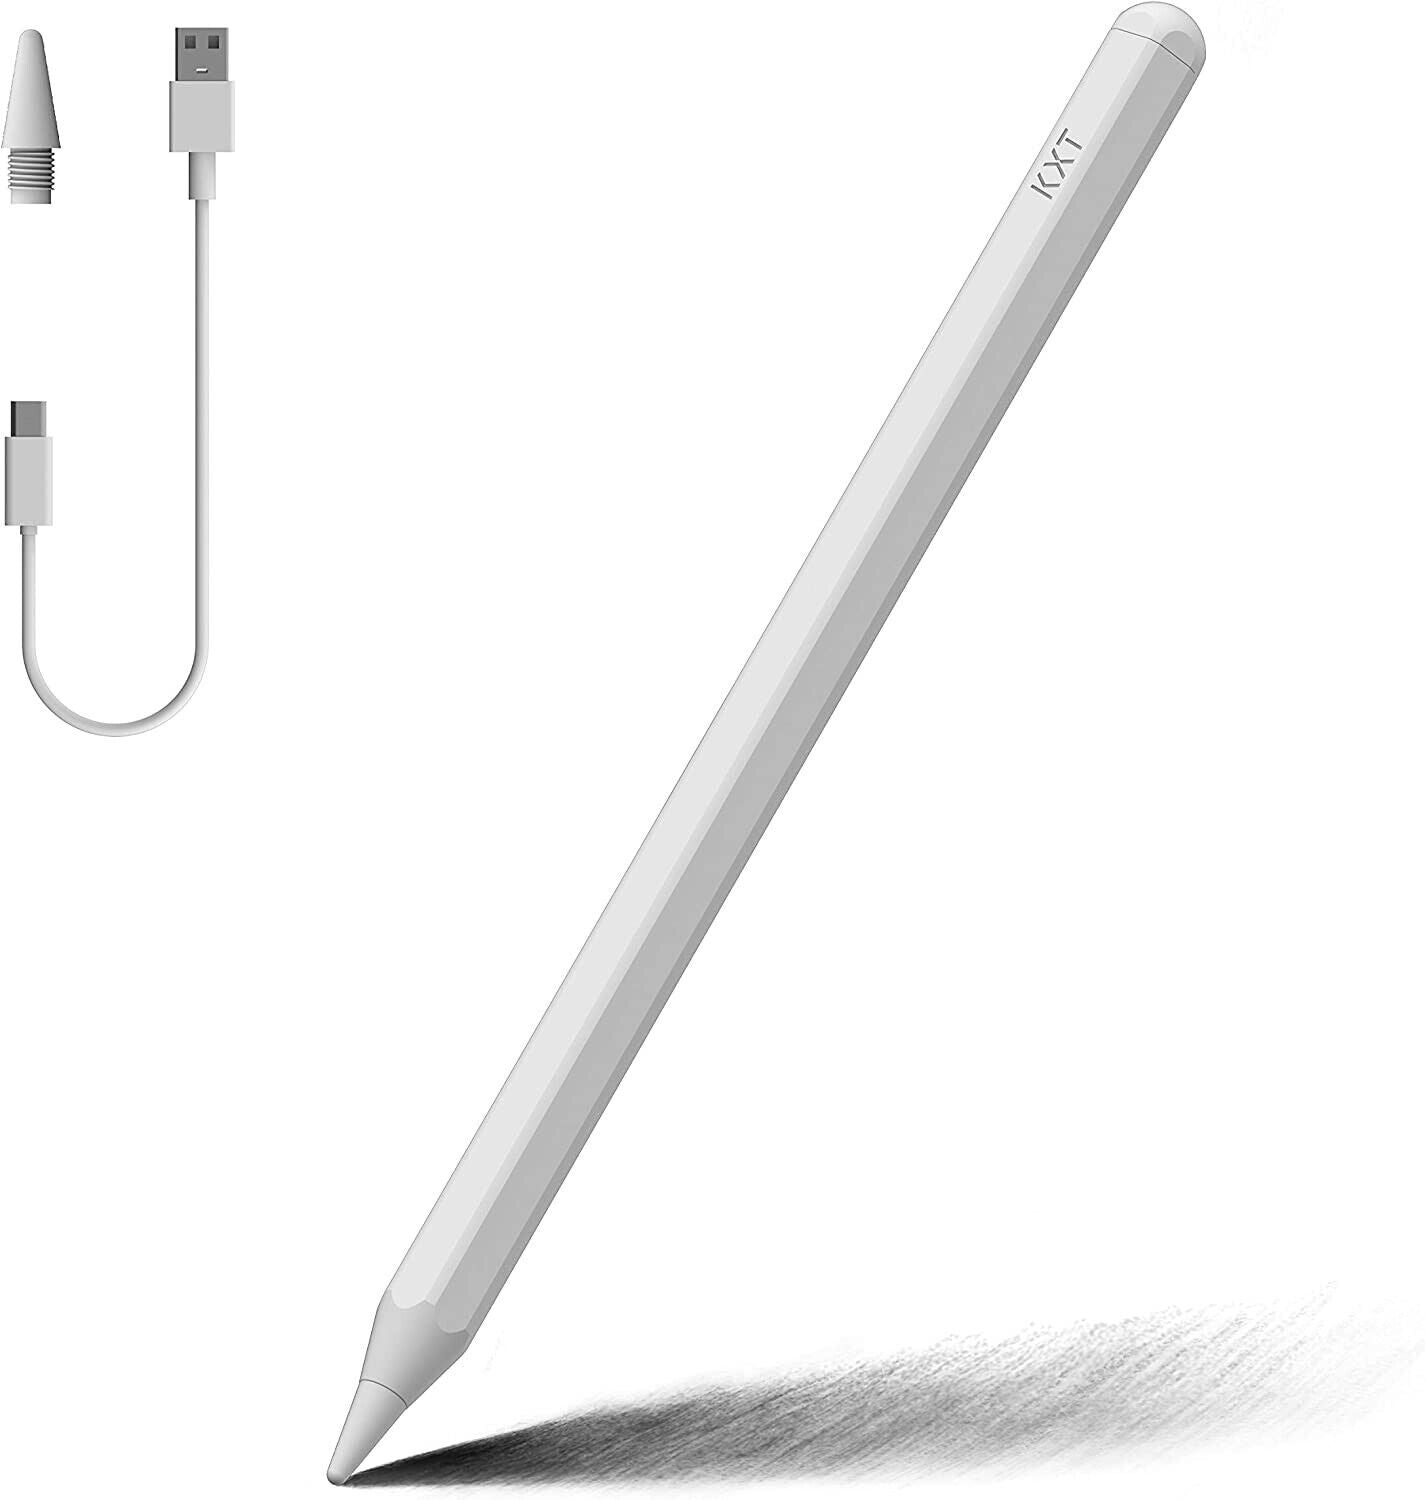 Magnetic Stylus Pencil for iPad